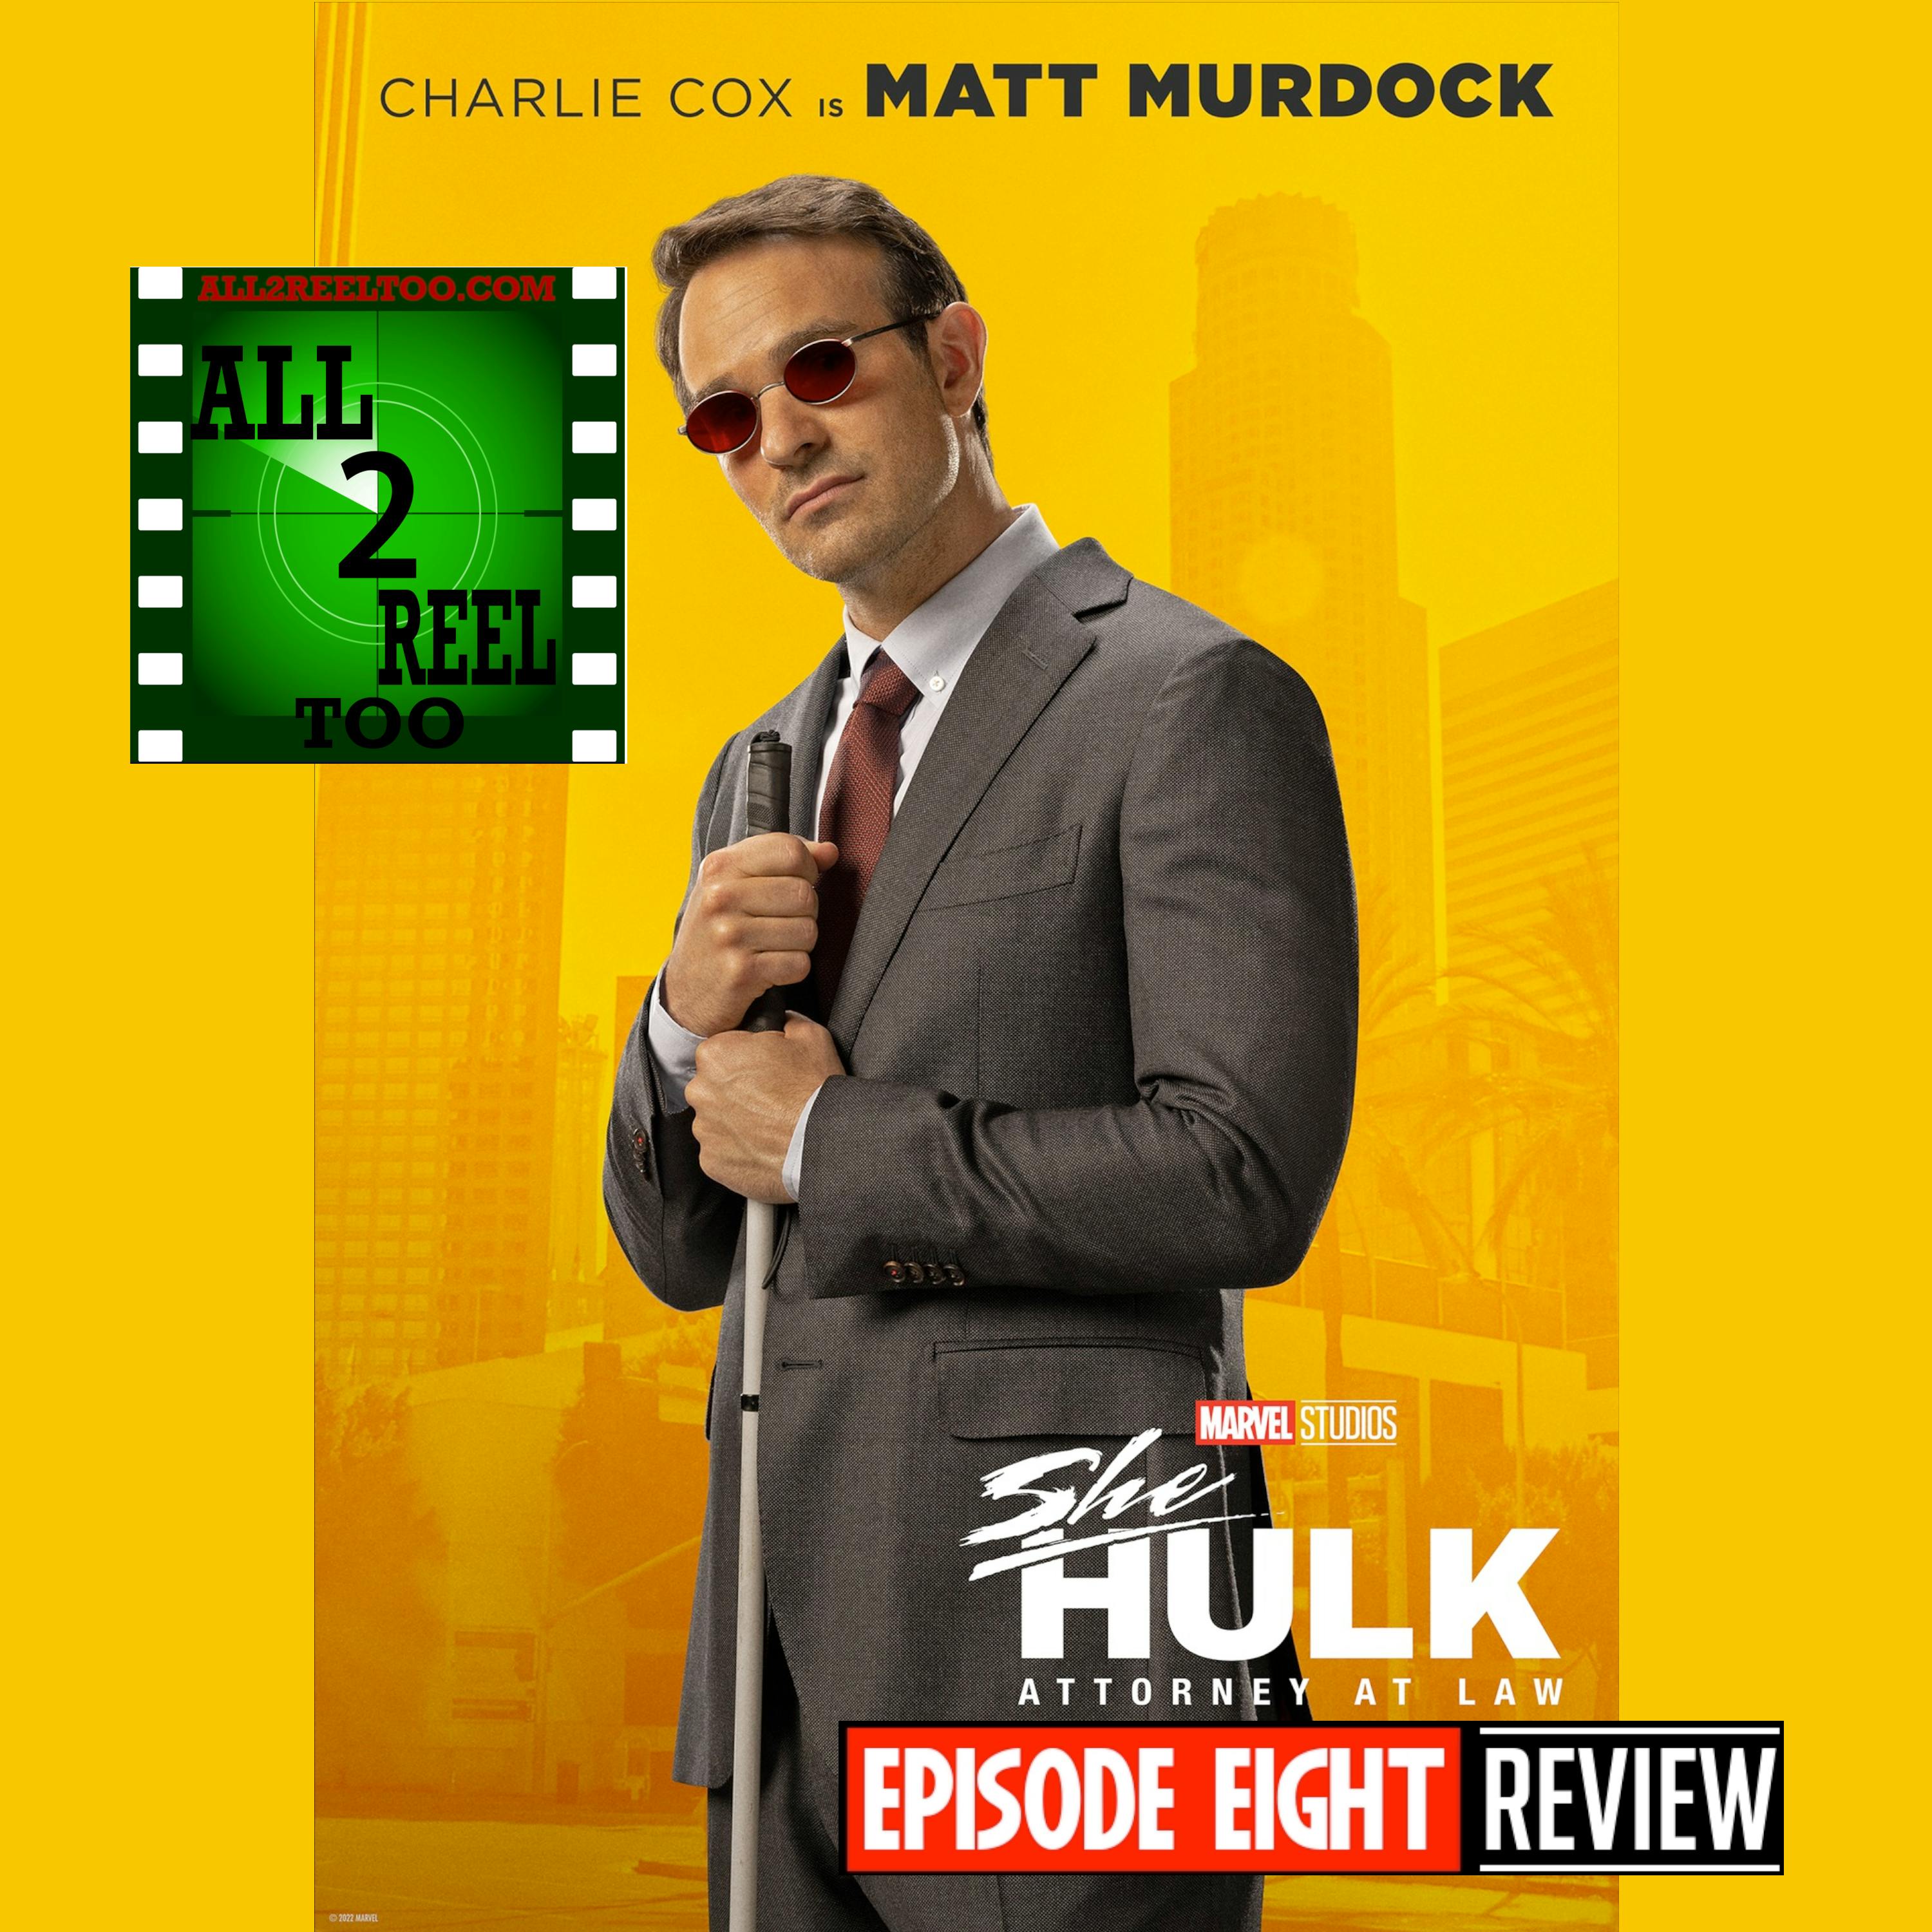 She-Hulk: Attorney at Law - EPISODE 8 REVIEW